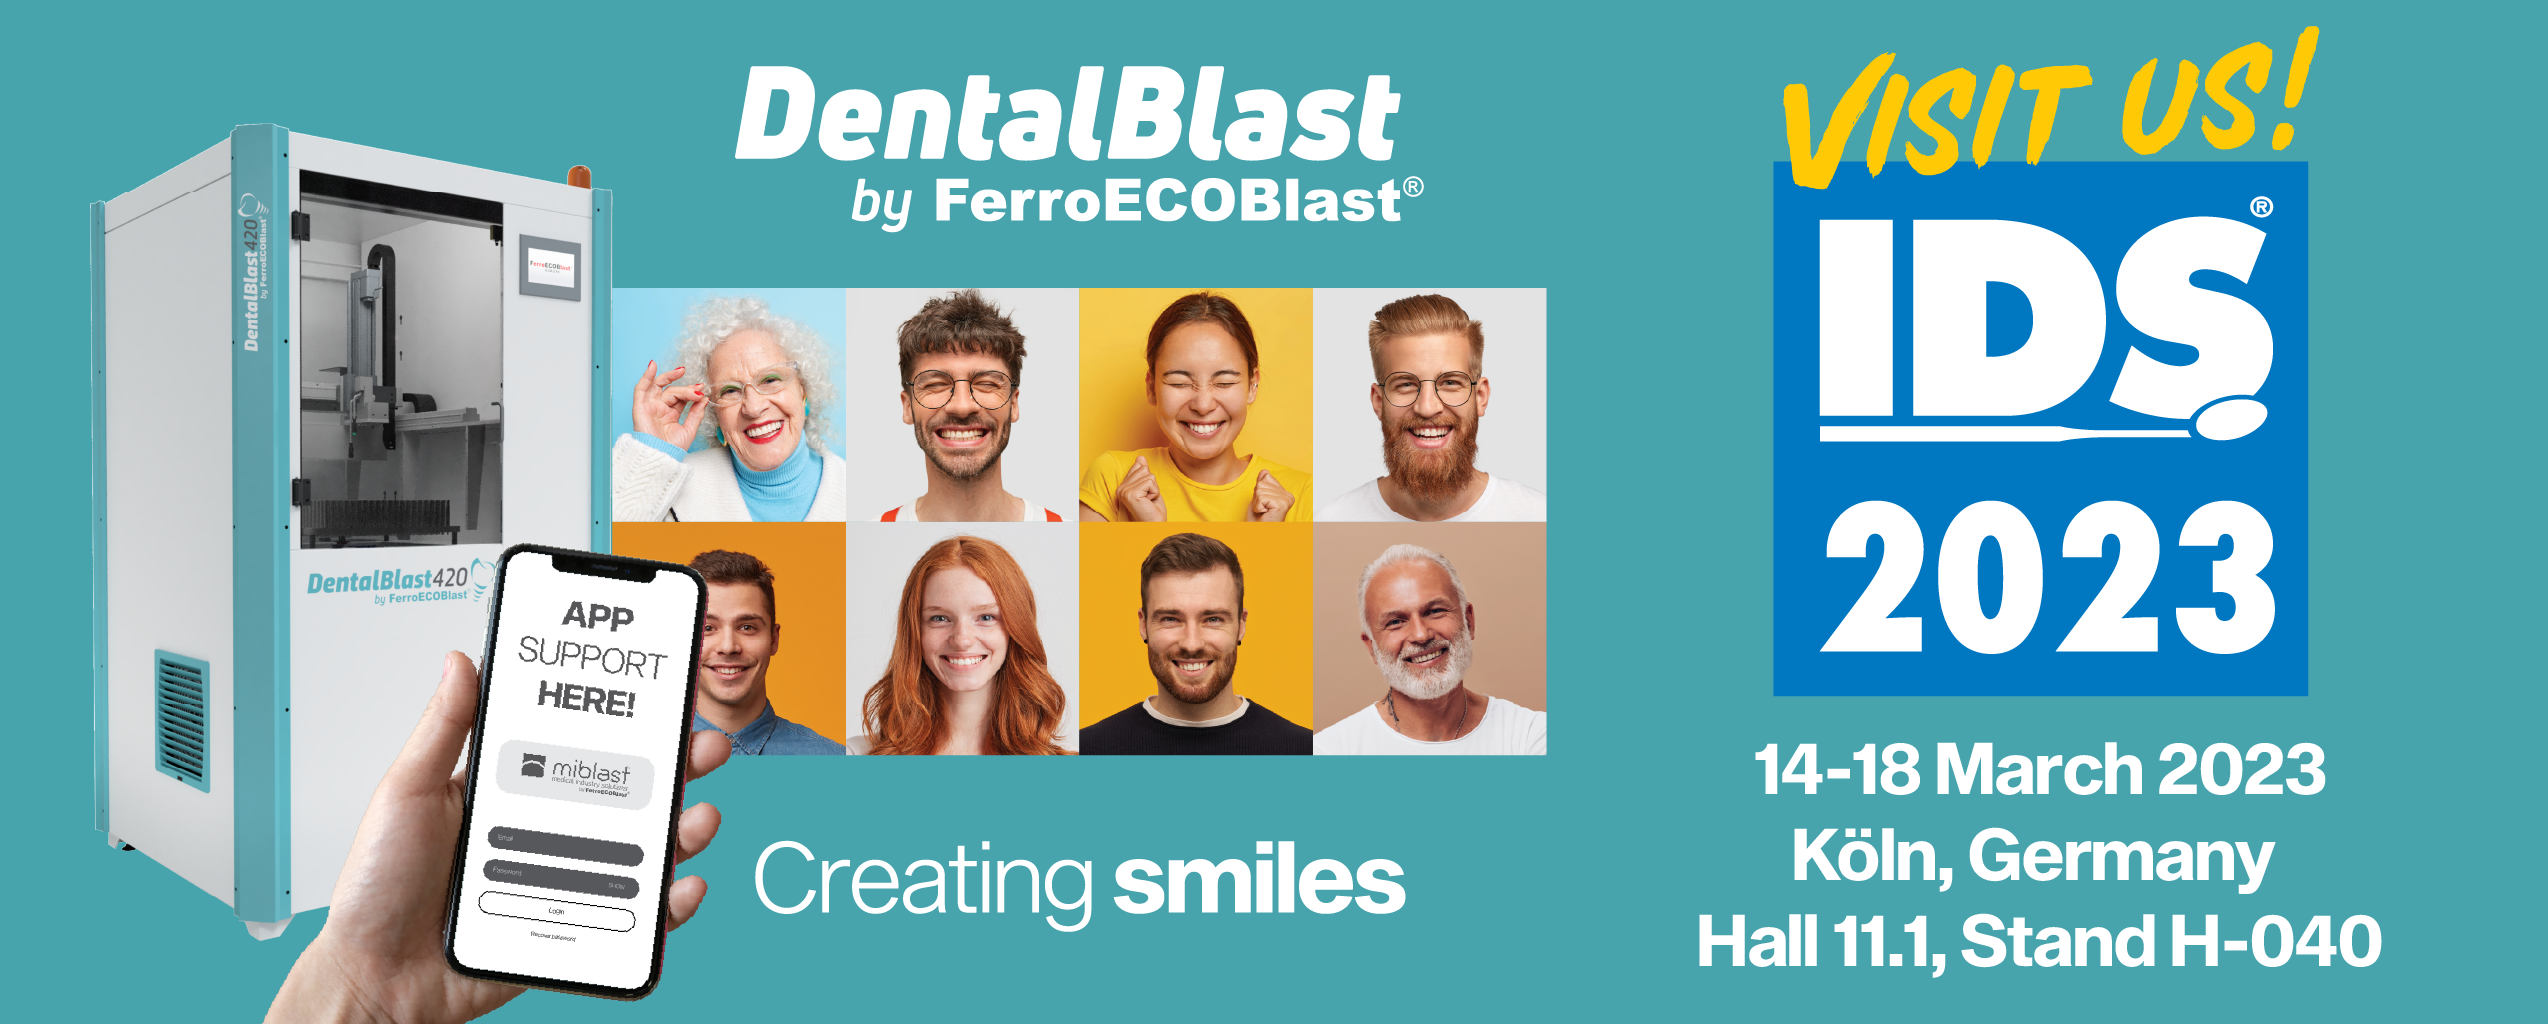 <h1>Meet DentalBlast by FerroECOBlast at <span style="color: rgb(196, 22, 28);"><strong>IDS 2023!</strong></span></h1>